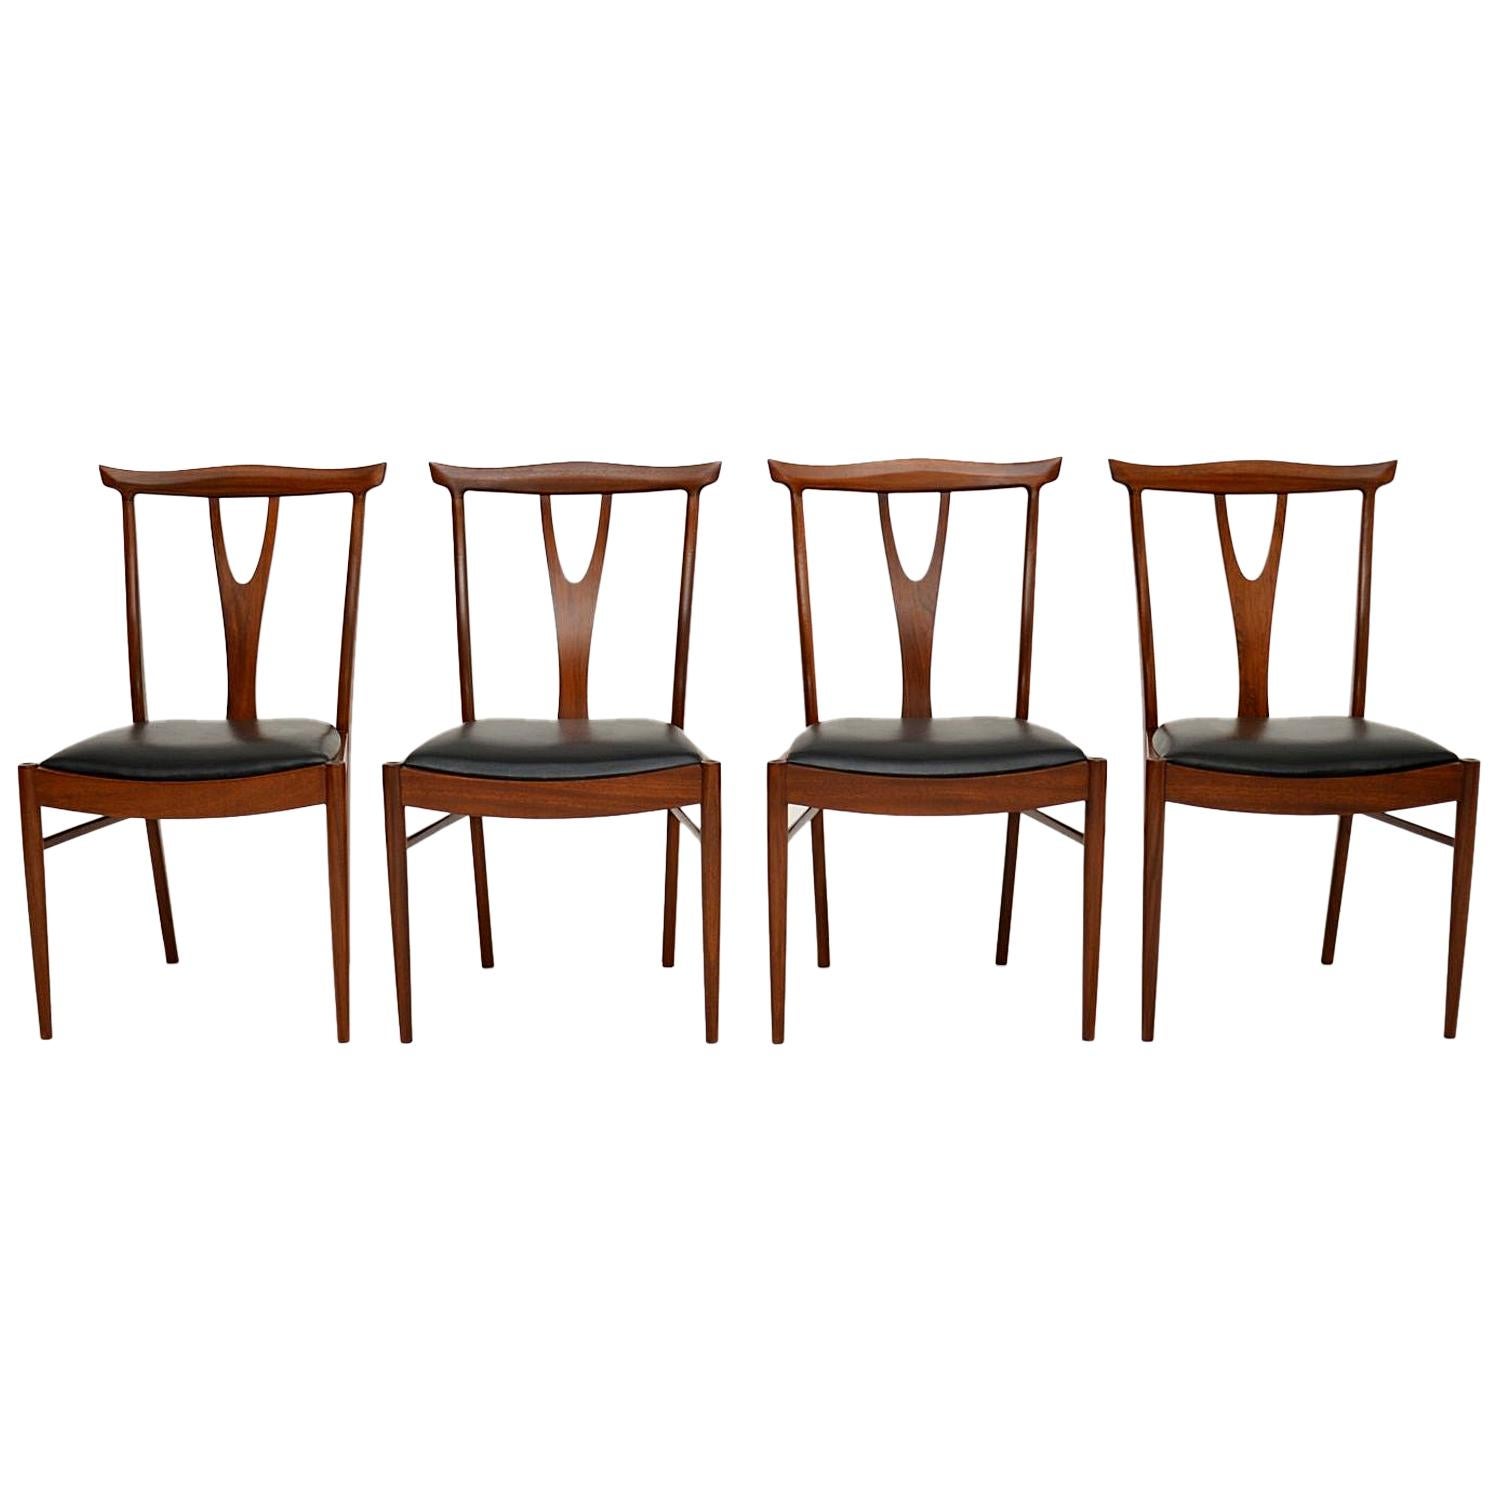 Set of 4 Vintage Dining Chairs in Afromosia